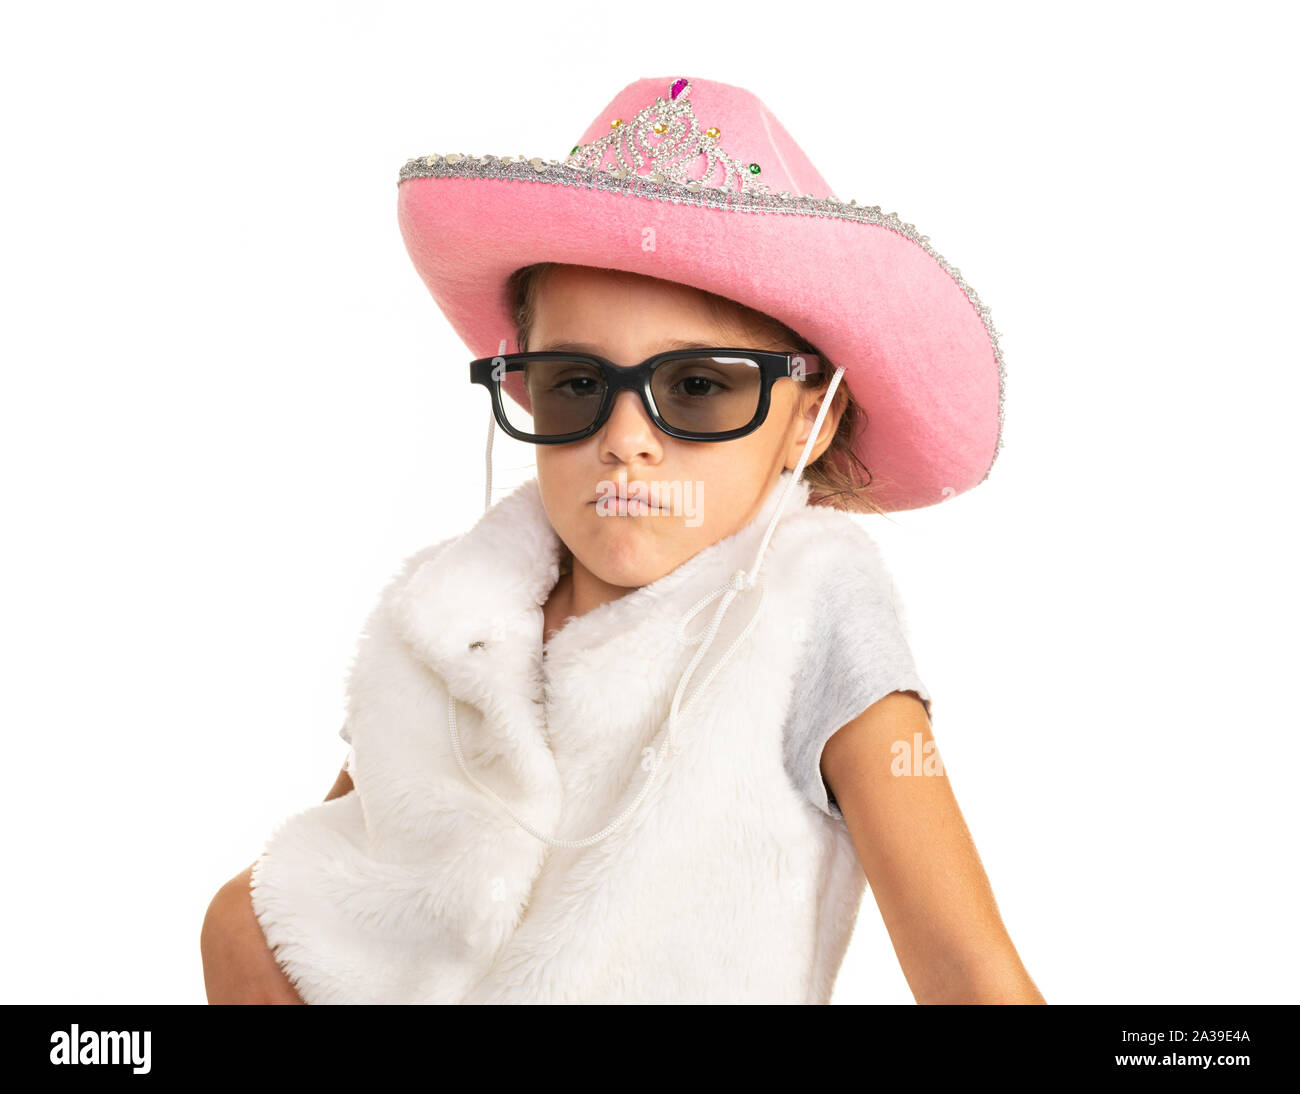 Young girl in cowboy hat and sunglasses posing on a white background. Stock Photo